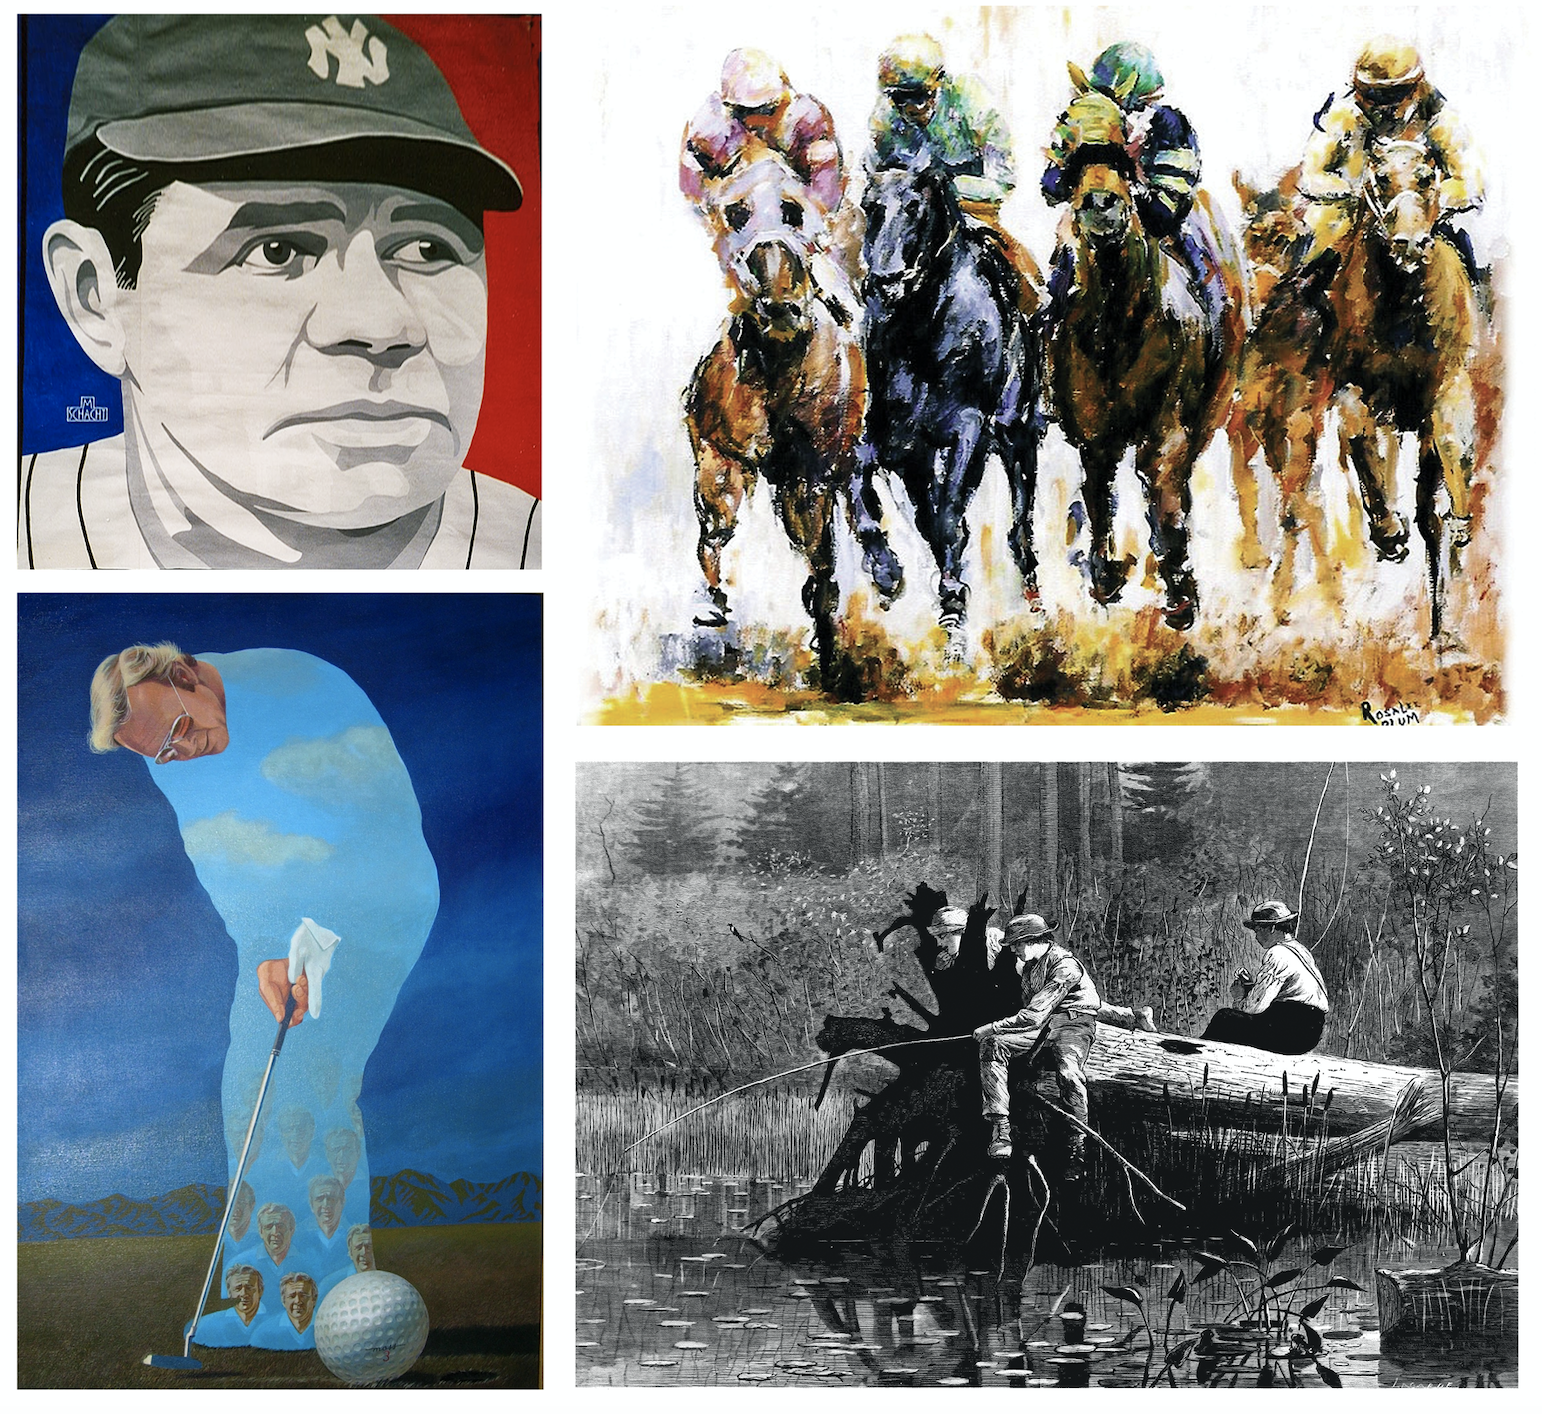 Four pieces of art in a collage. The top left painting is of Babe Ruth; the top right painting is of four horses with riders; the bottom left painting is of Arnold Palmer golfing; and the bottom right is an illustration of people fishing. 